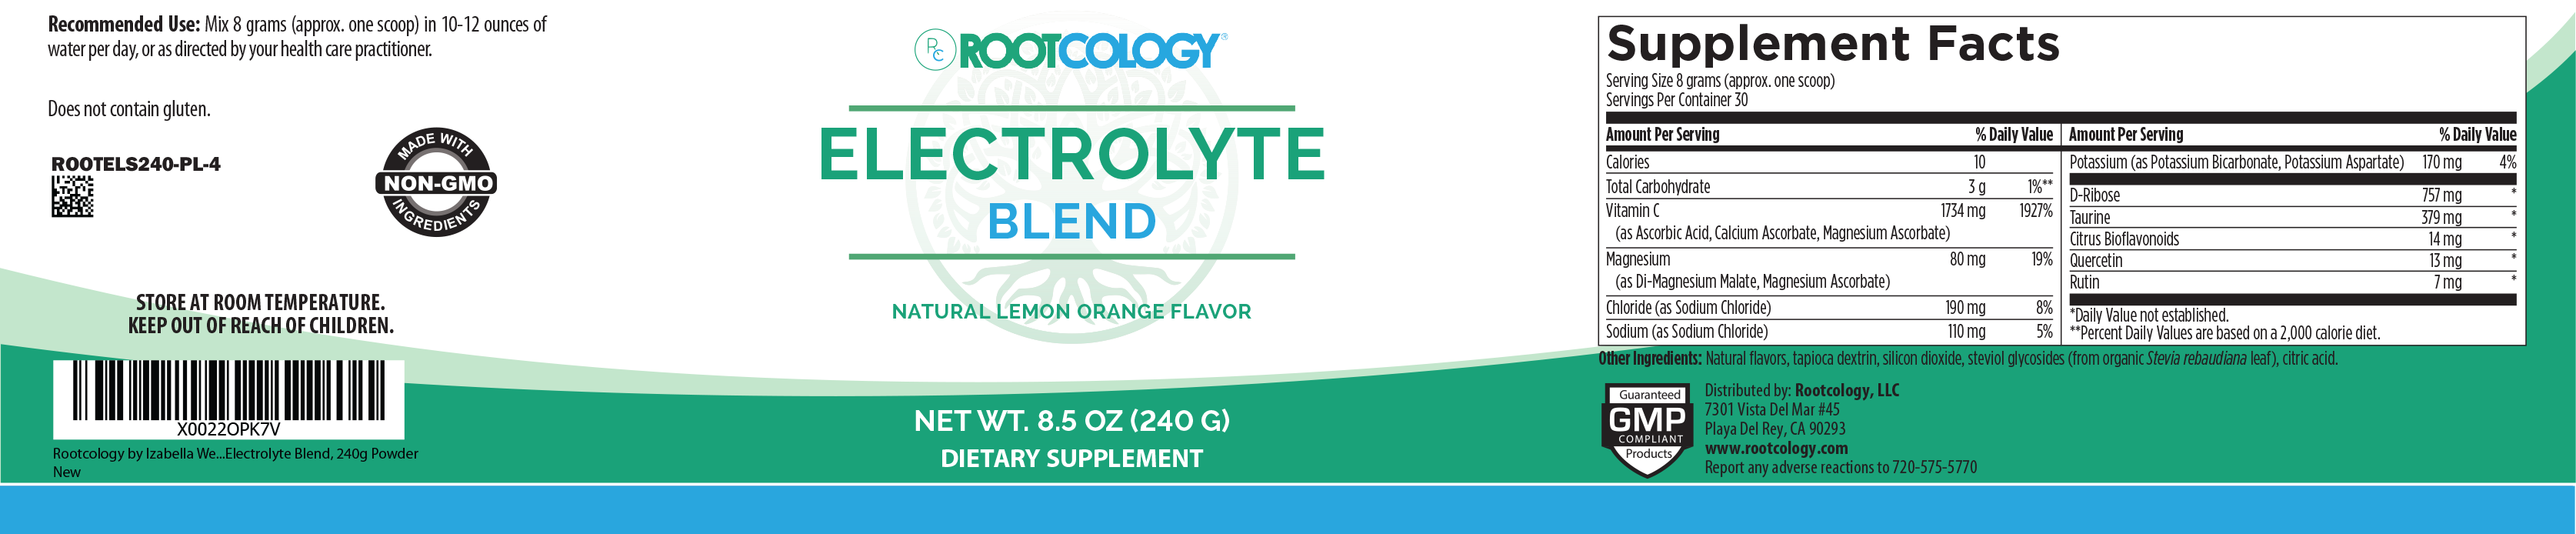 Electrolyte Blend - Rootcology